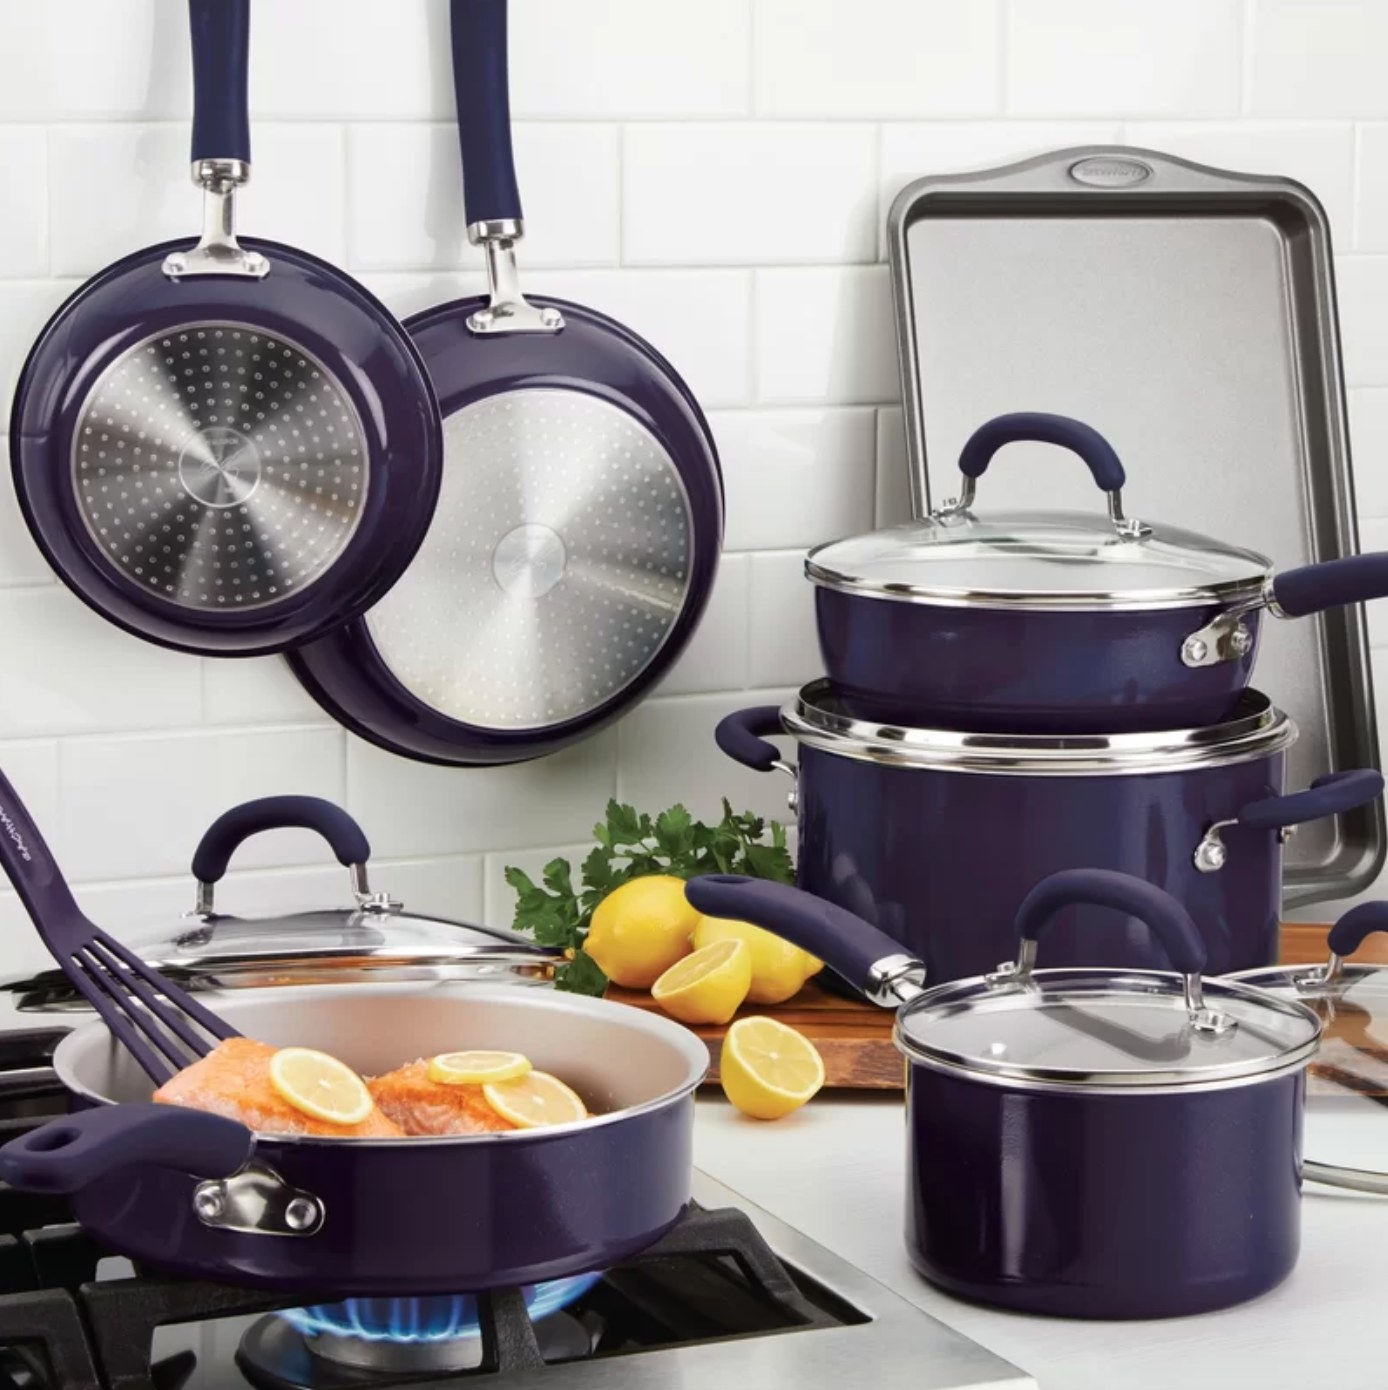 The 13 piece nonstick cookware set in purple shimmer